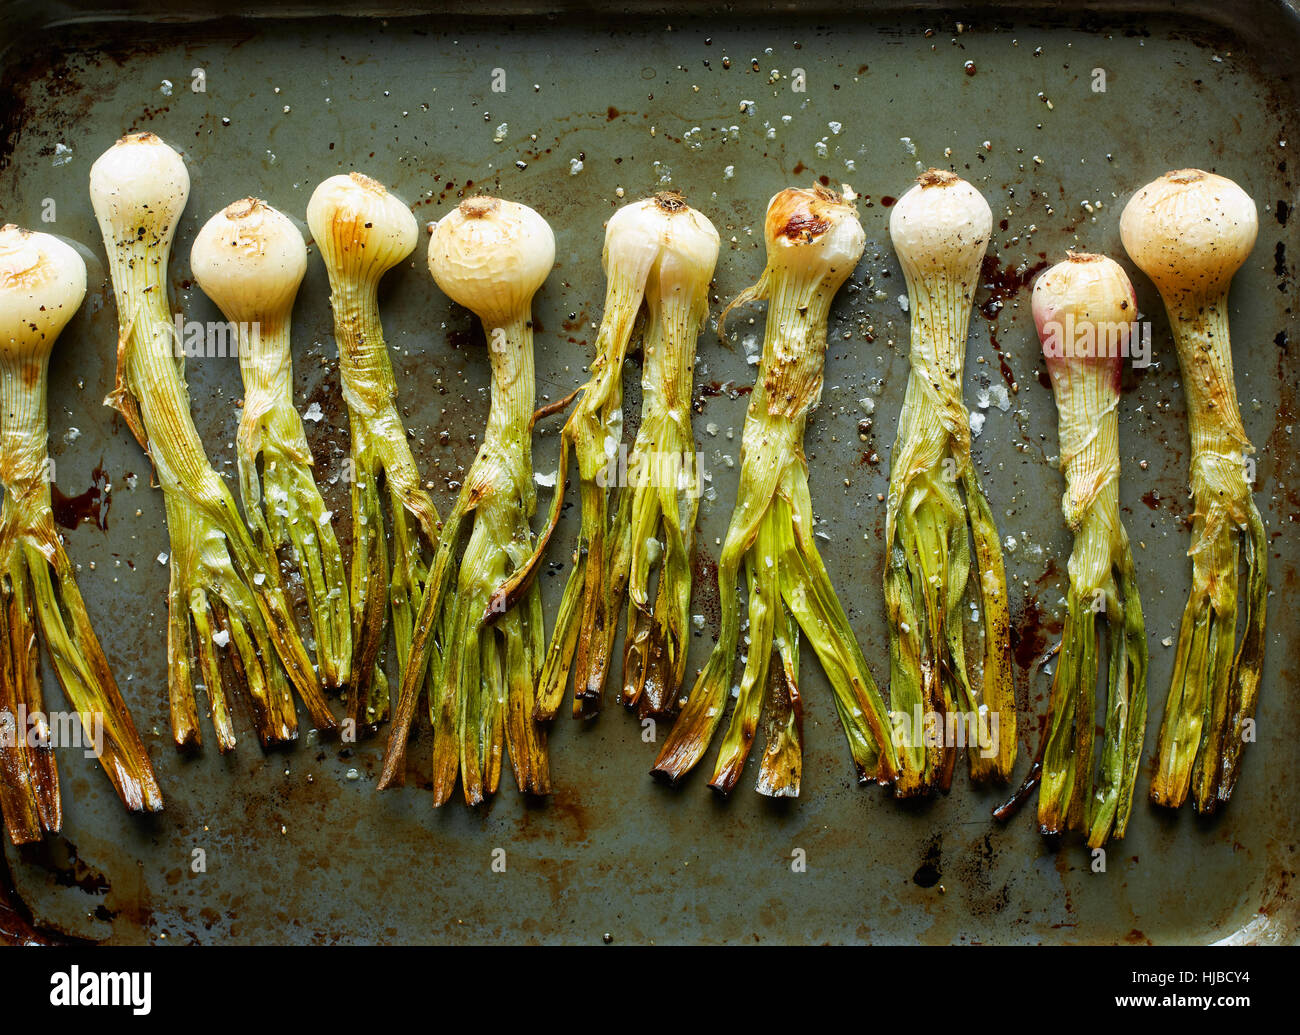 Overhead view of roasted whole spring onions in roasting tin Stock Photo